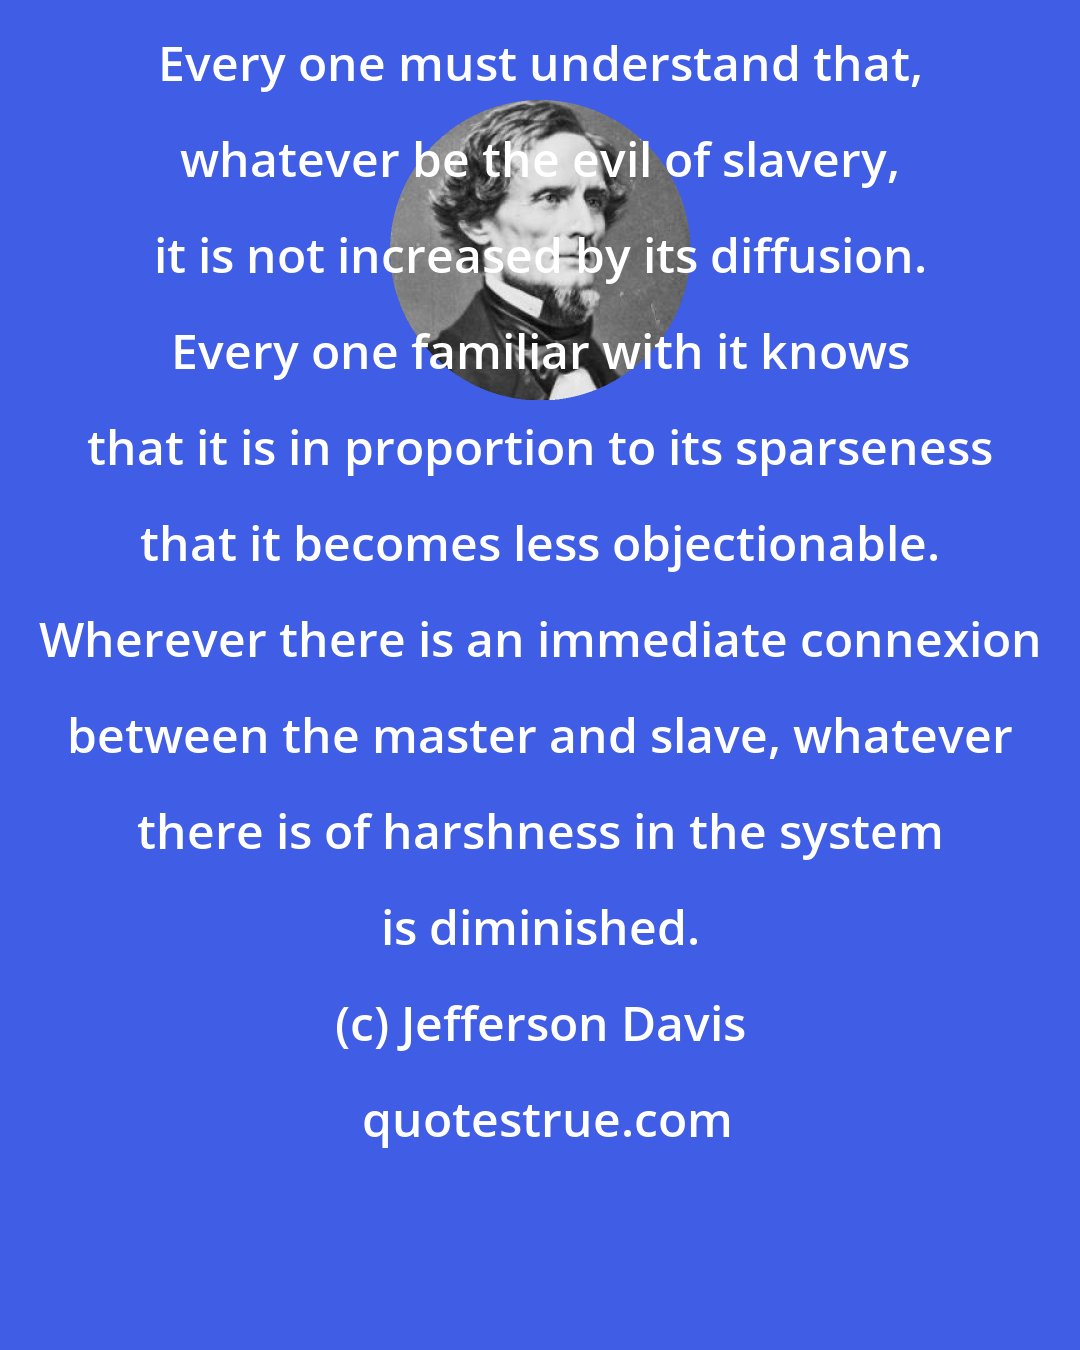 Jefferson Davis: Every one must understand that, whatever be the evil of slavery, it is not increased by its diffusion. Every one familiar with it knows that it is in proportion to its sparseness that it becomes less objectionable. Wherever there is an immediate connexion between the master and slave, whatever there is of harshness in the system is diminished.